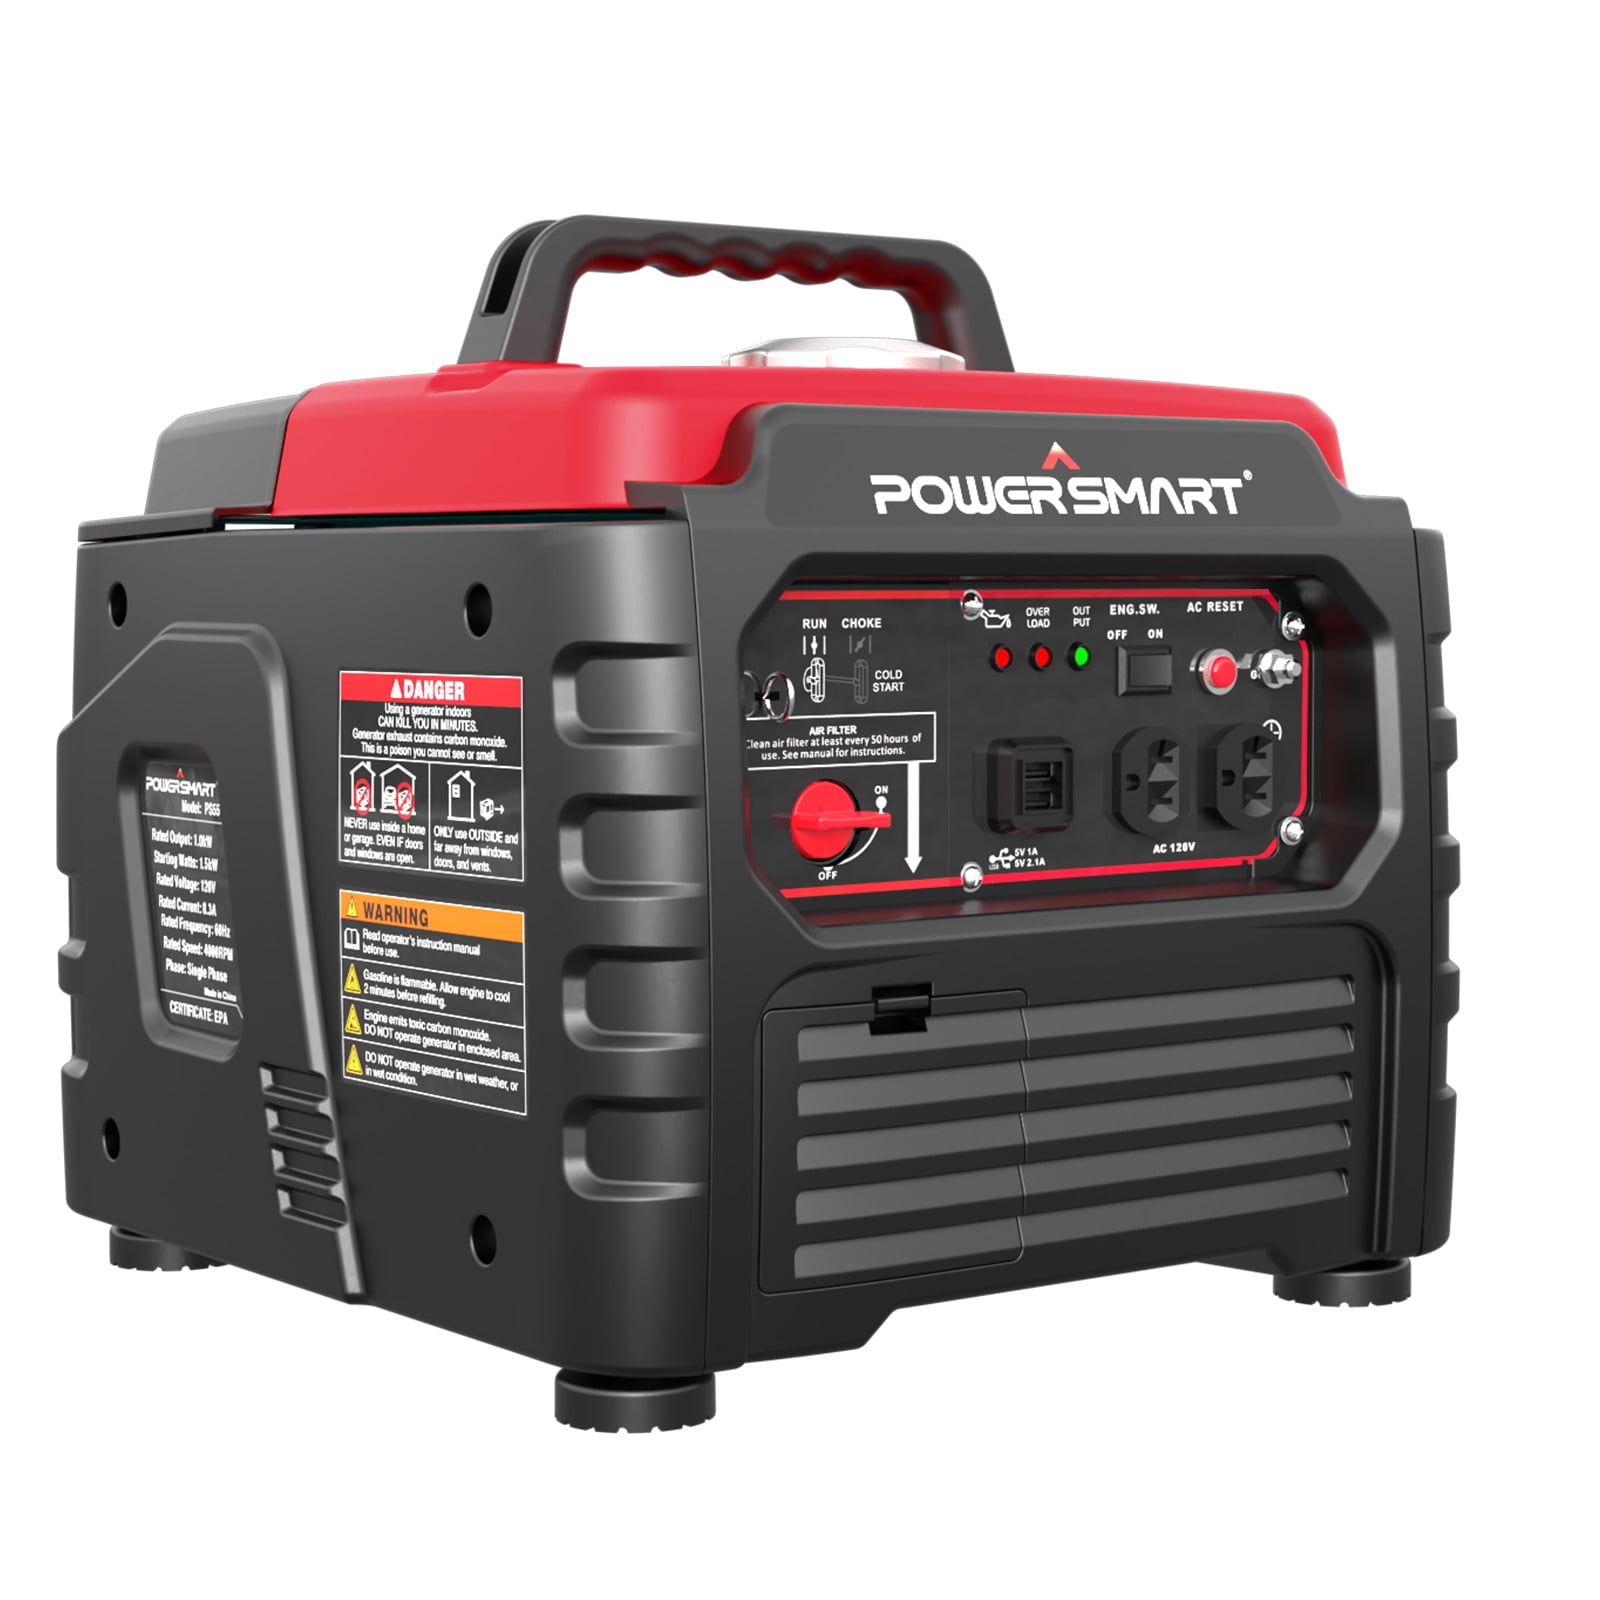 PowerSmart 1500 Watt Portable Gas Power Generator for Outdoor Camping and Home Use, Inverter Generator , PS55